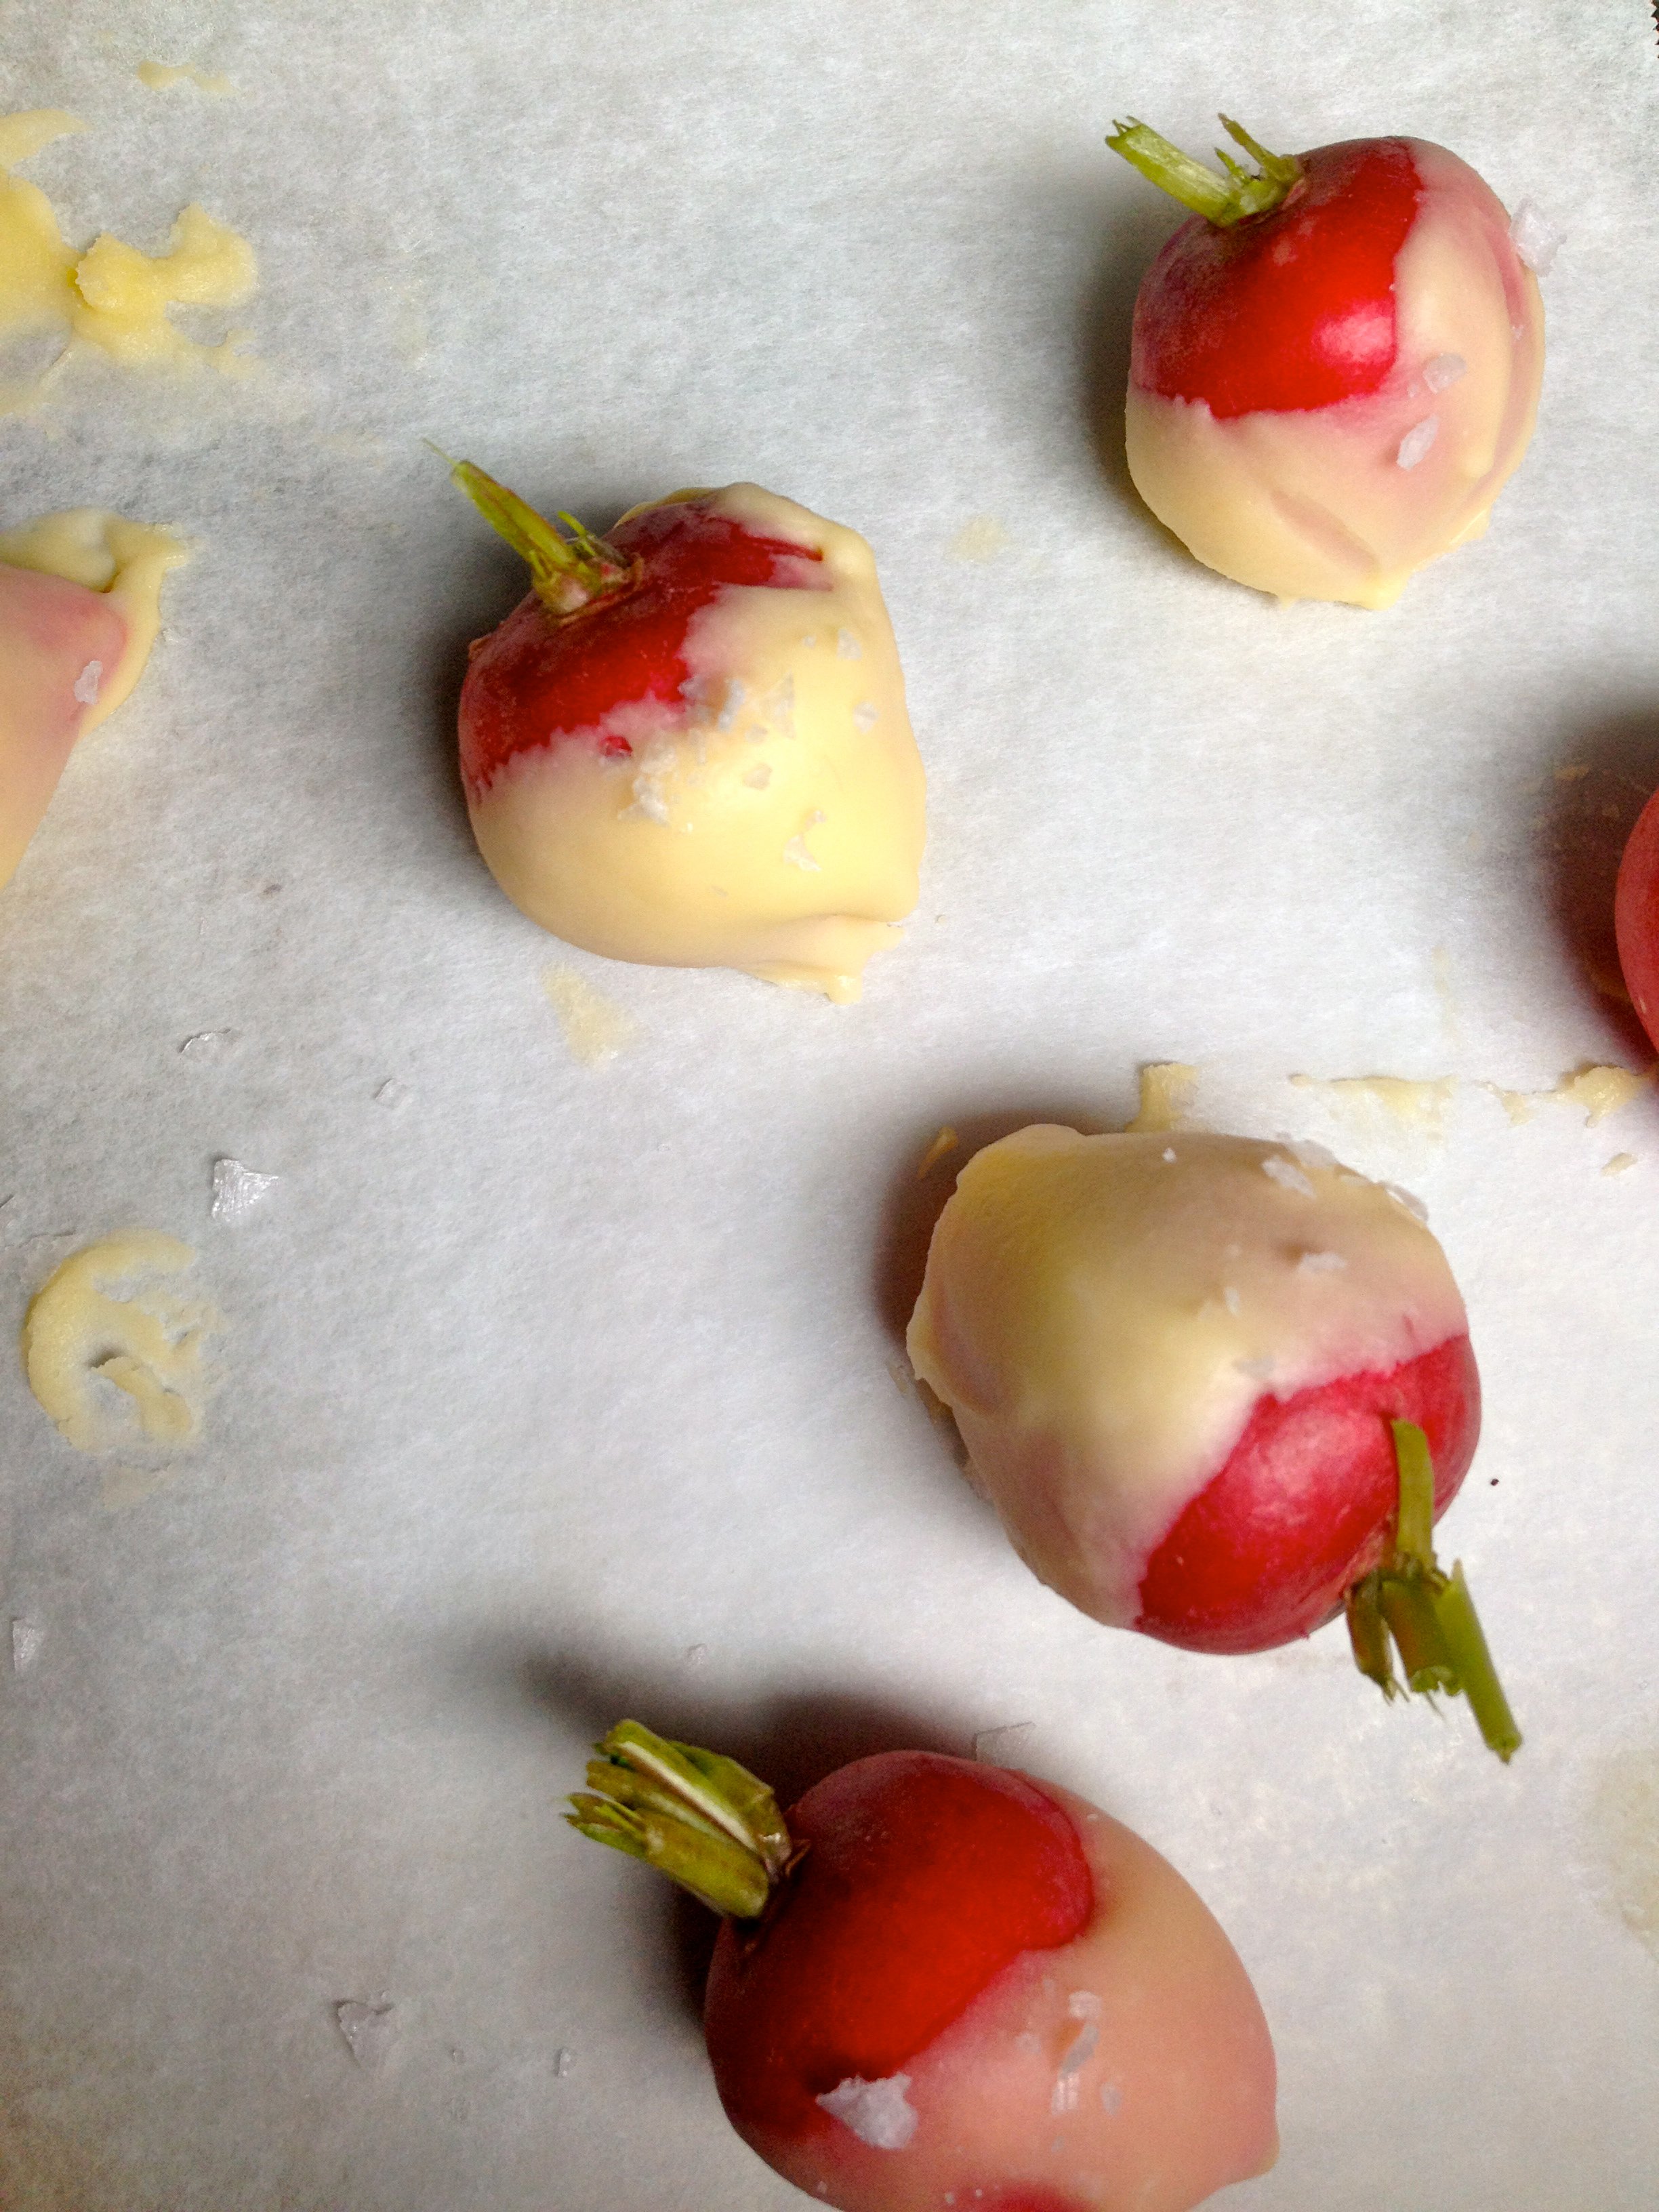 You must try these butter-dipped radishes